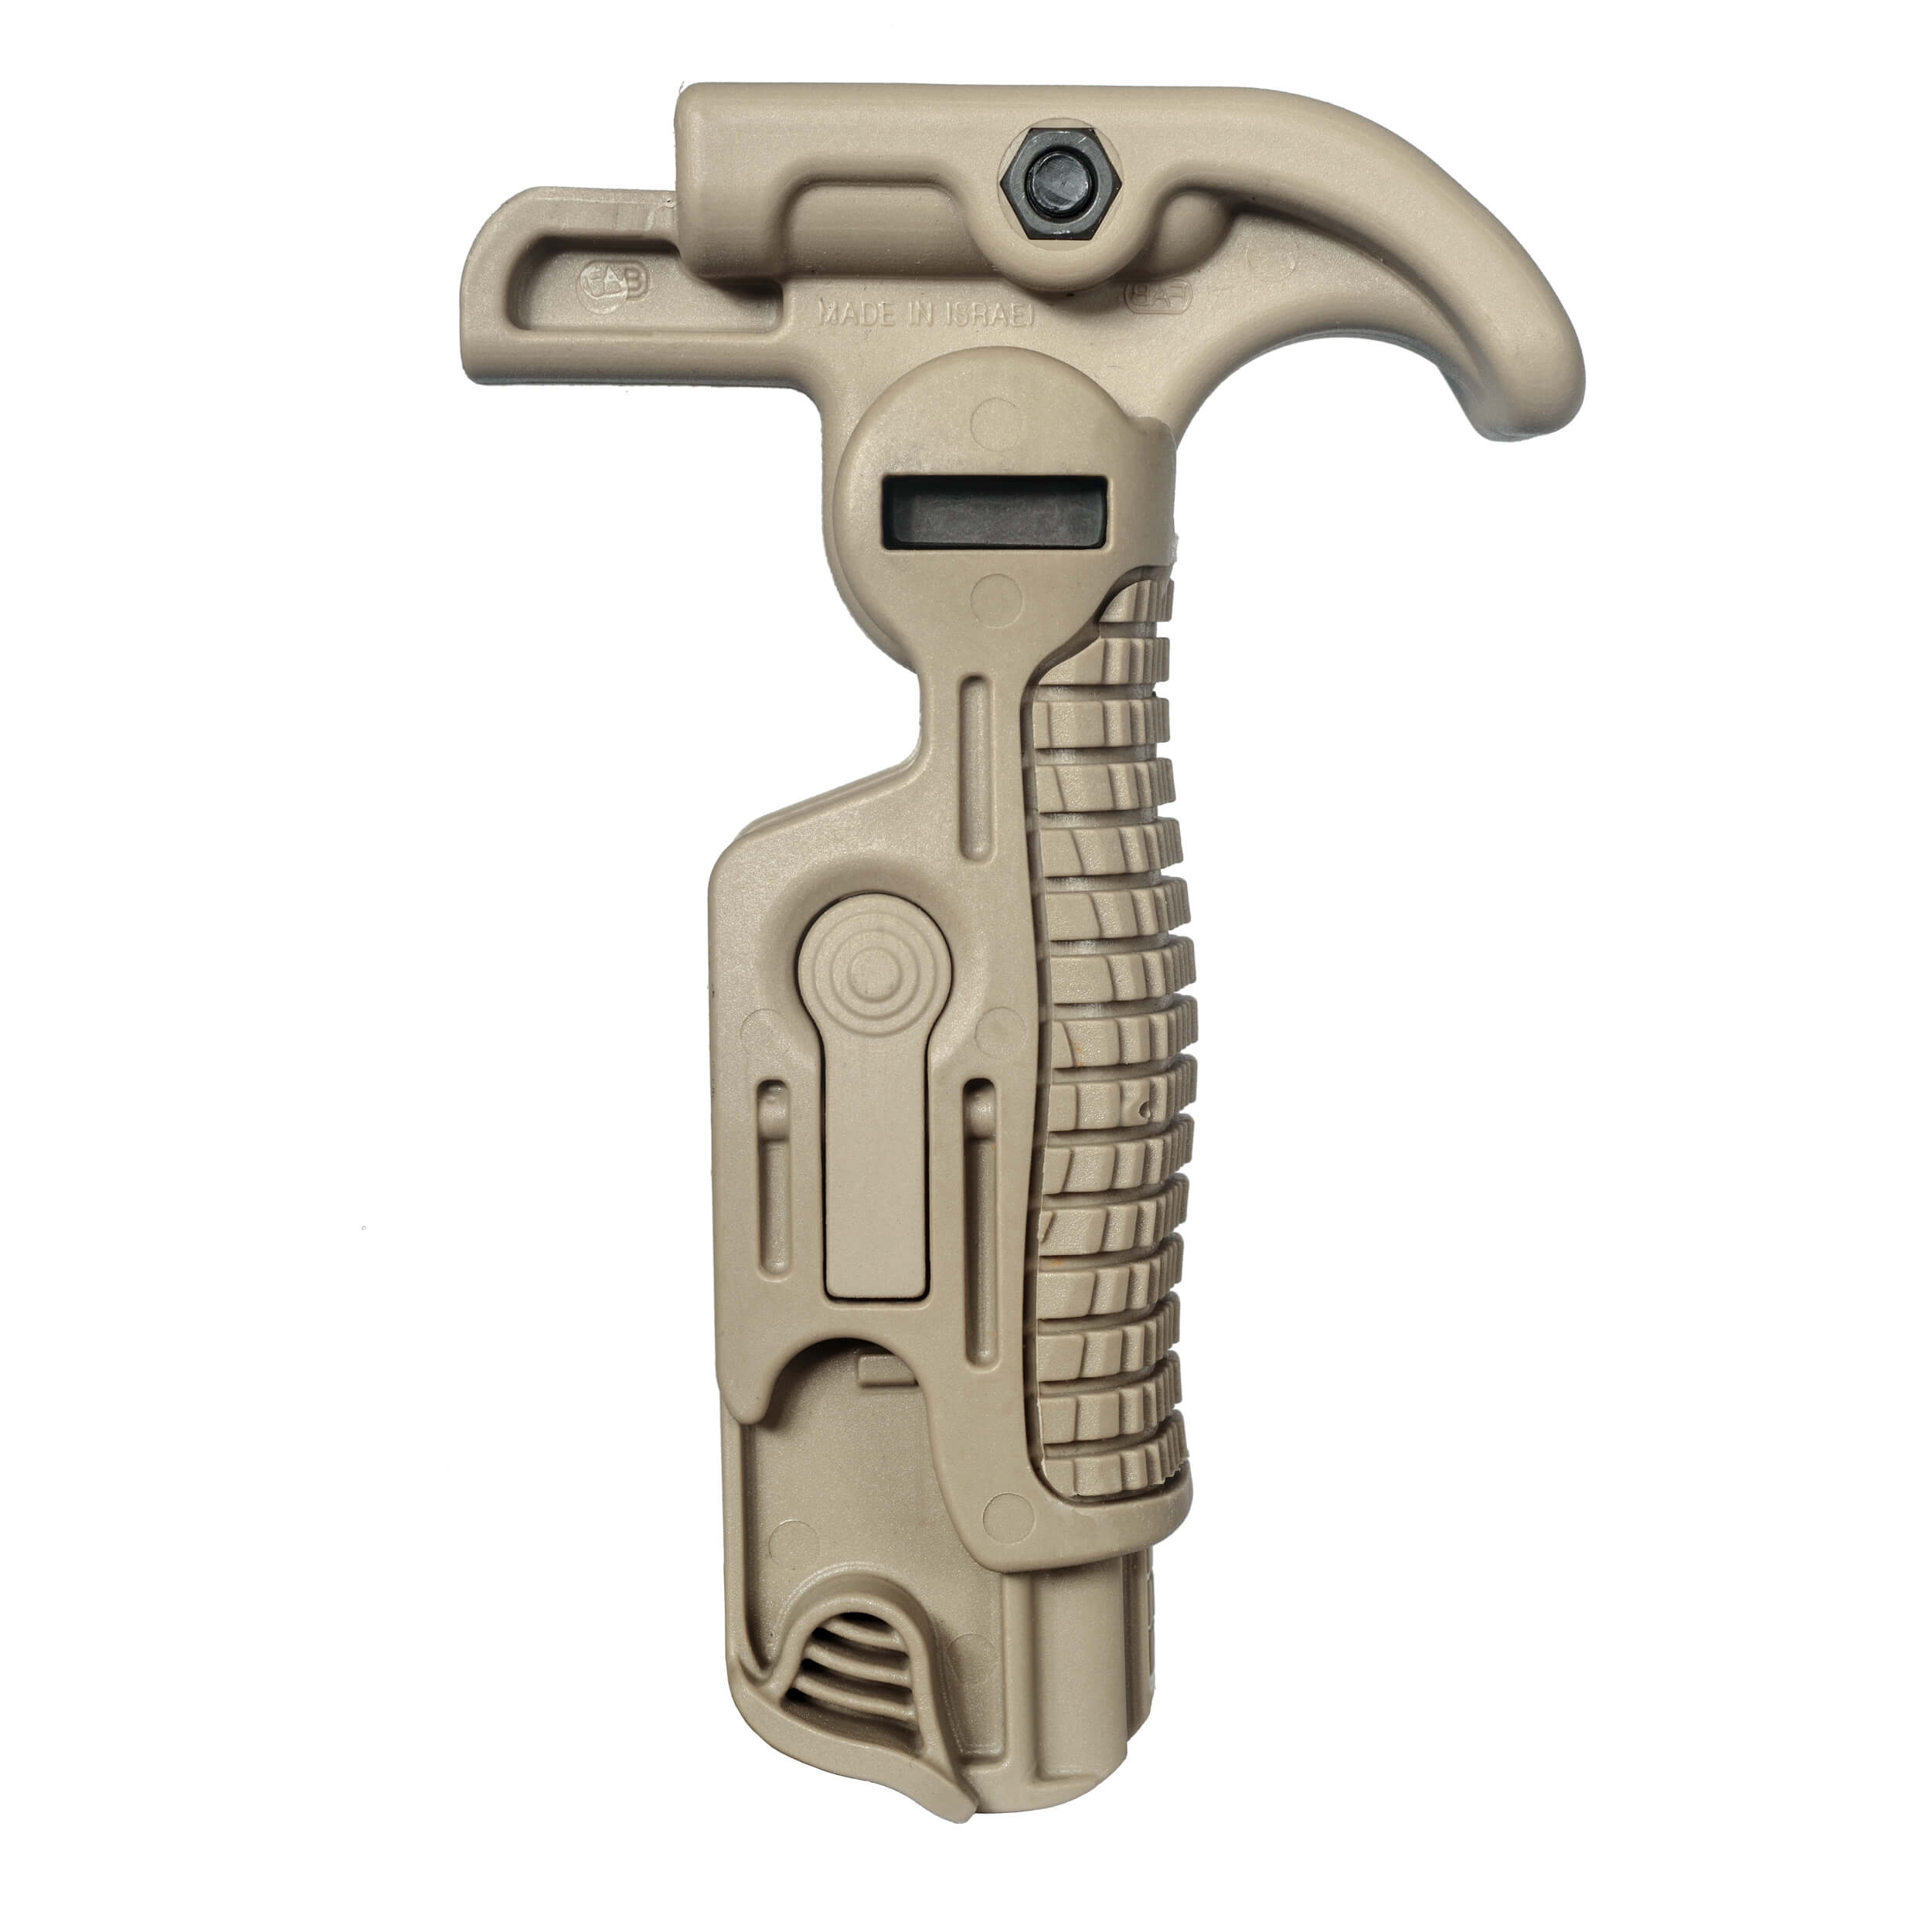 FGGK-S Folding Foregrip and Trigger Cover